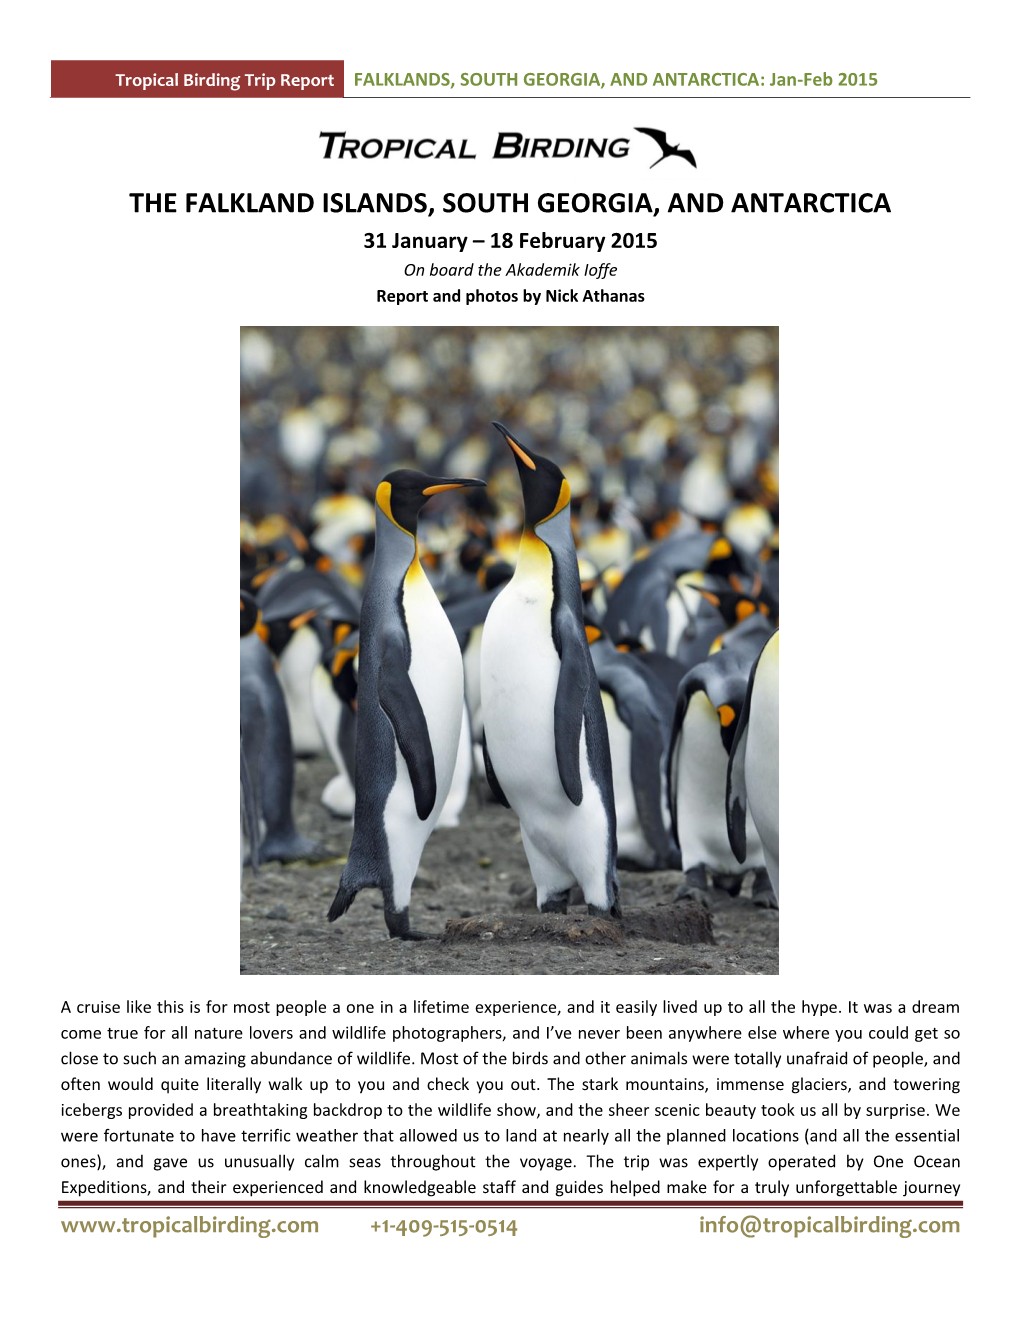 THE FALKLAND ISLANDS, SOUTH GEORGIA, and ANTARCTICA 31 January – 18 February 2015 on Board the Akademik Ioffe Report and Photos by Nick Athanas